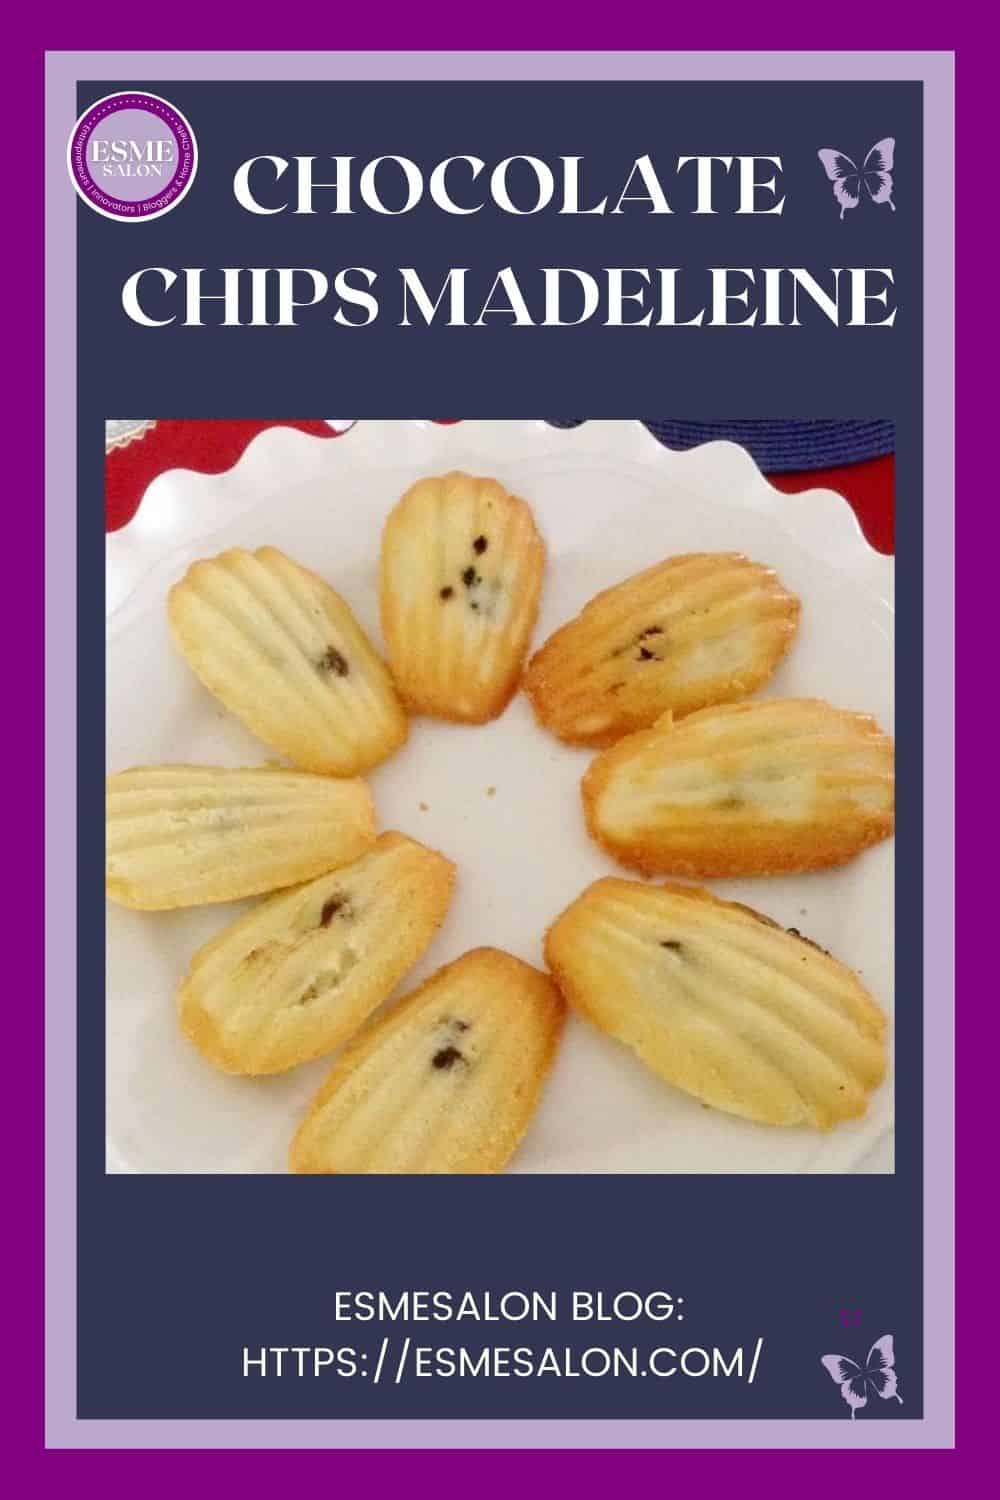 An image of a plate filled with wonderful tasty Chocolate Chips Madeleine